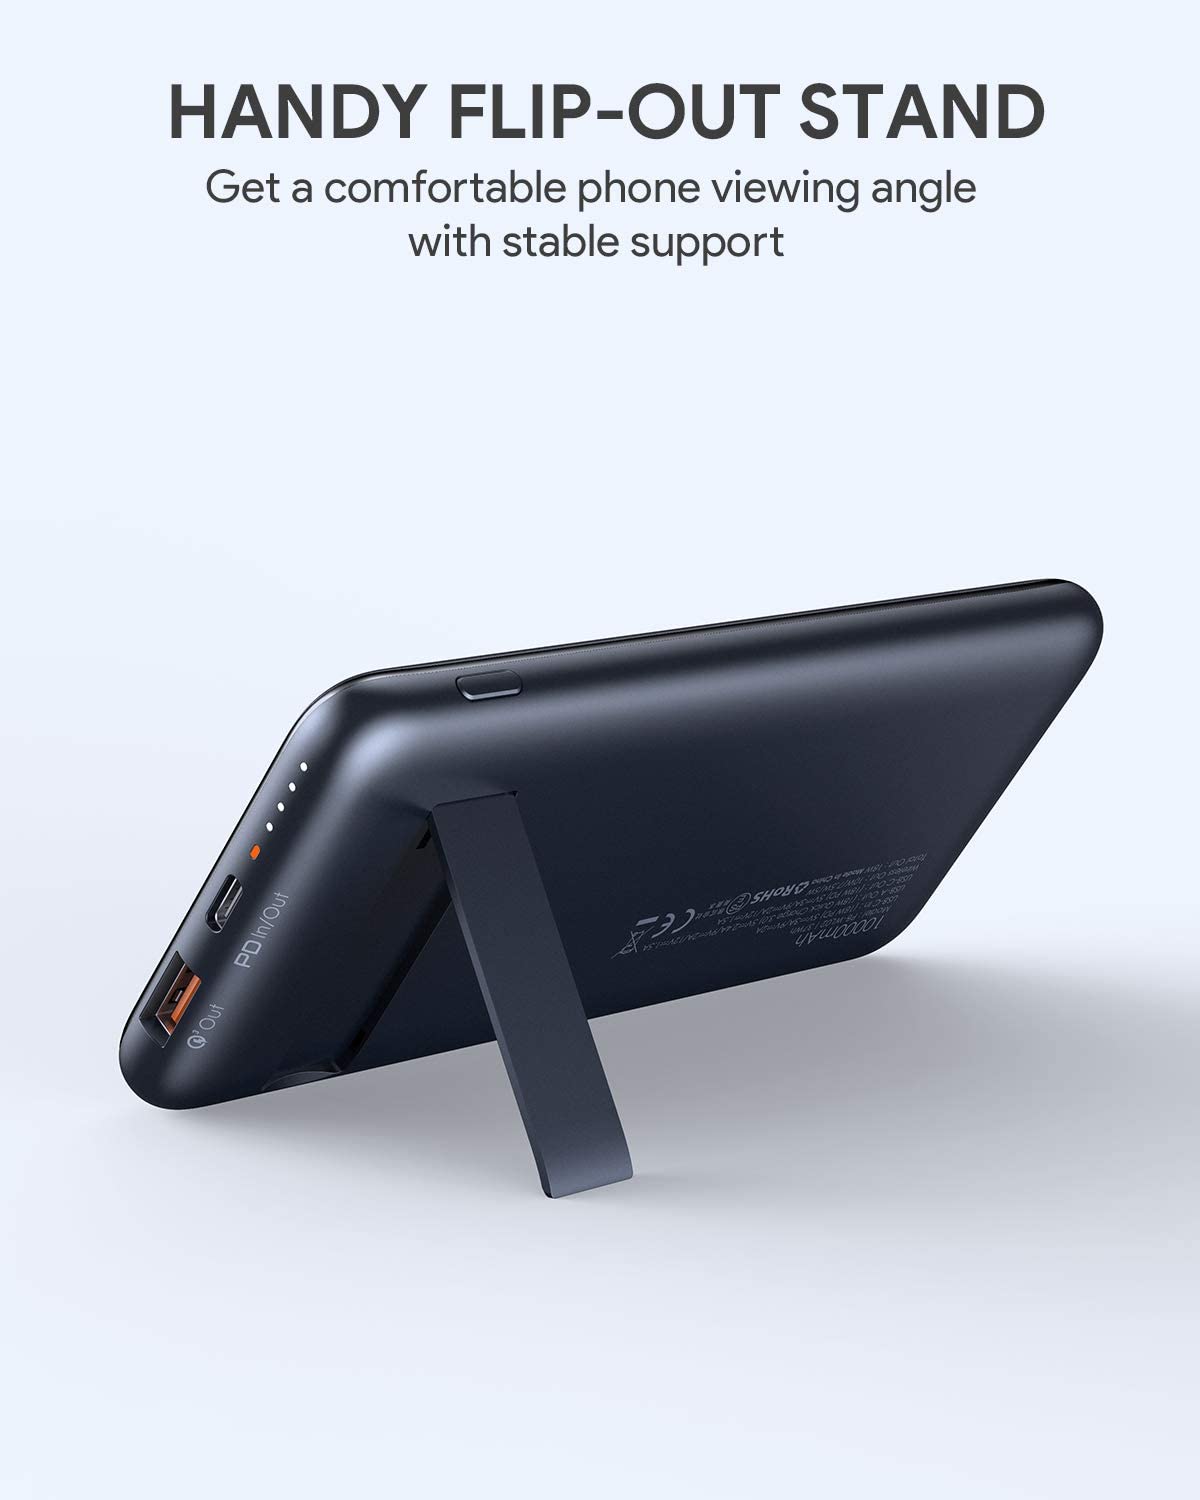 Aukey 10,000mAh Portable Wireless Power Bank, PD and QC3.0 - Black